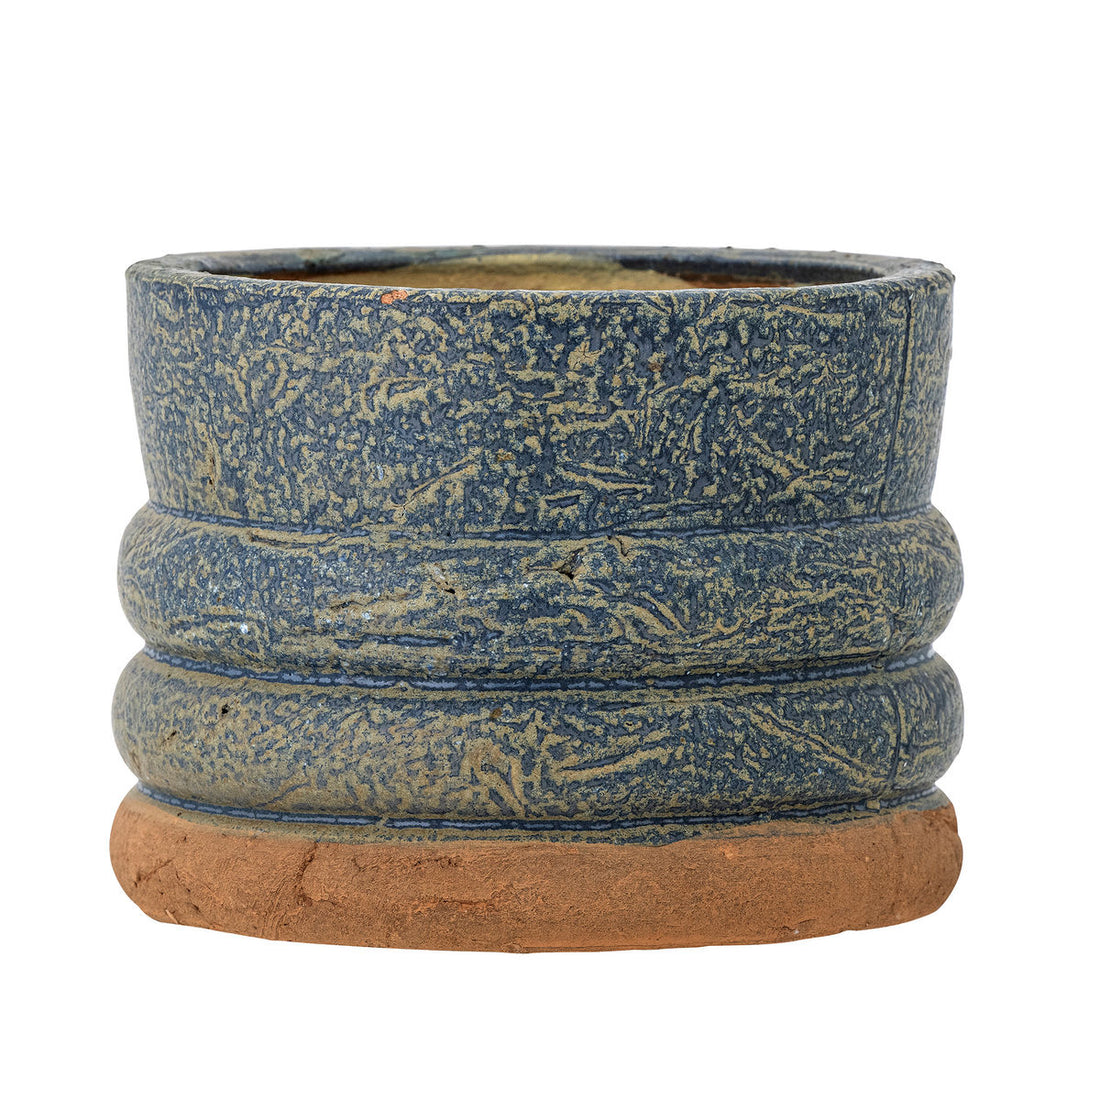 Creative Collection Maizun Herbal Potted Hears, Blue, Terracotta